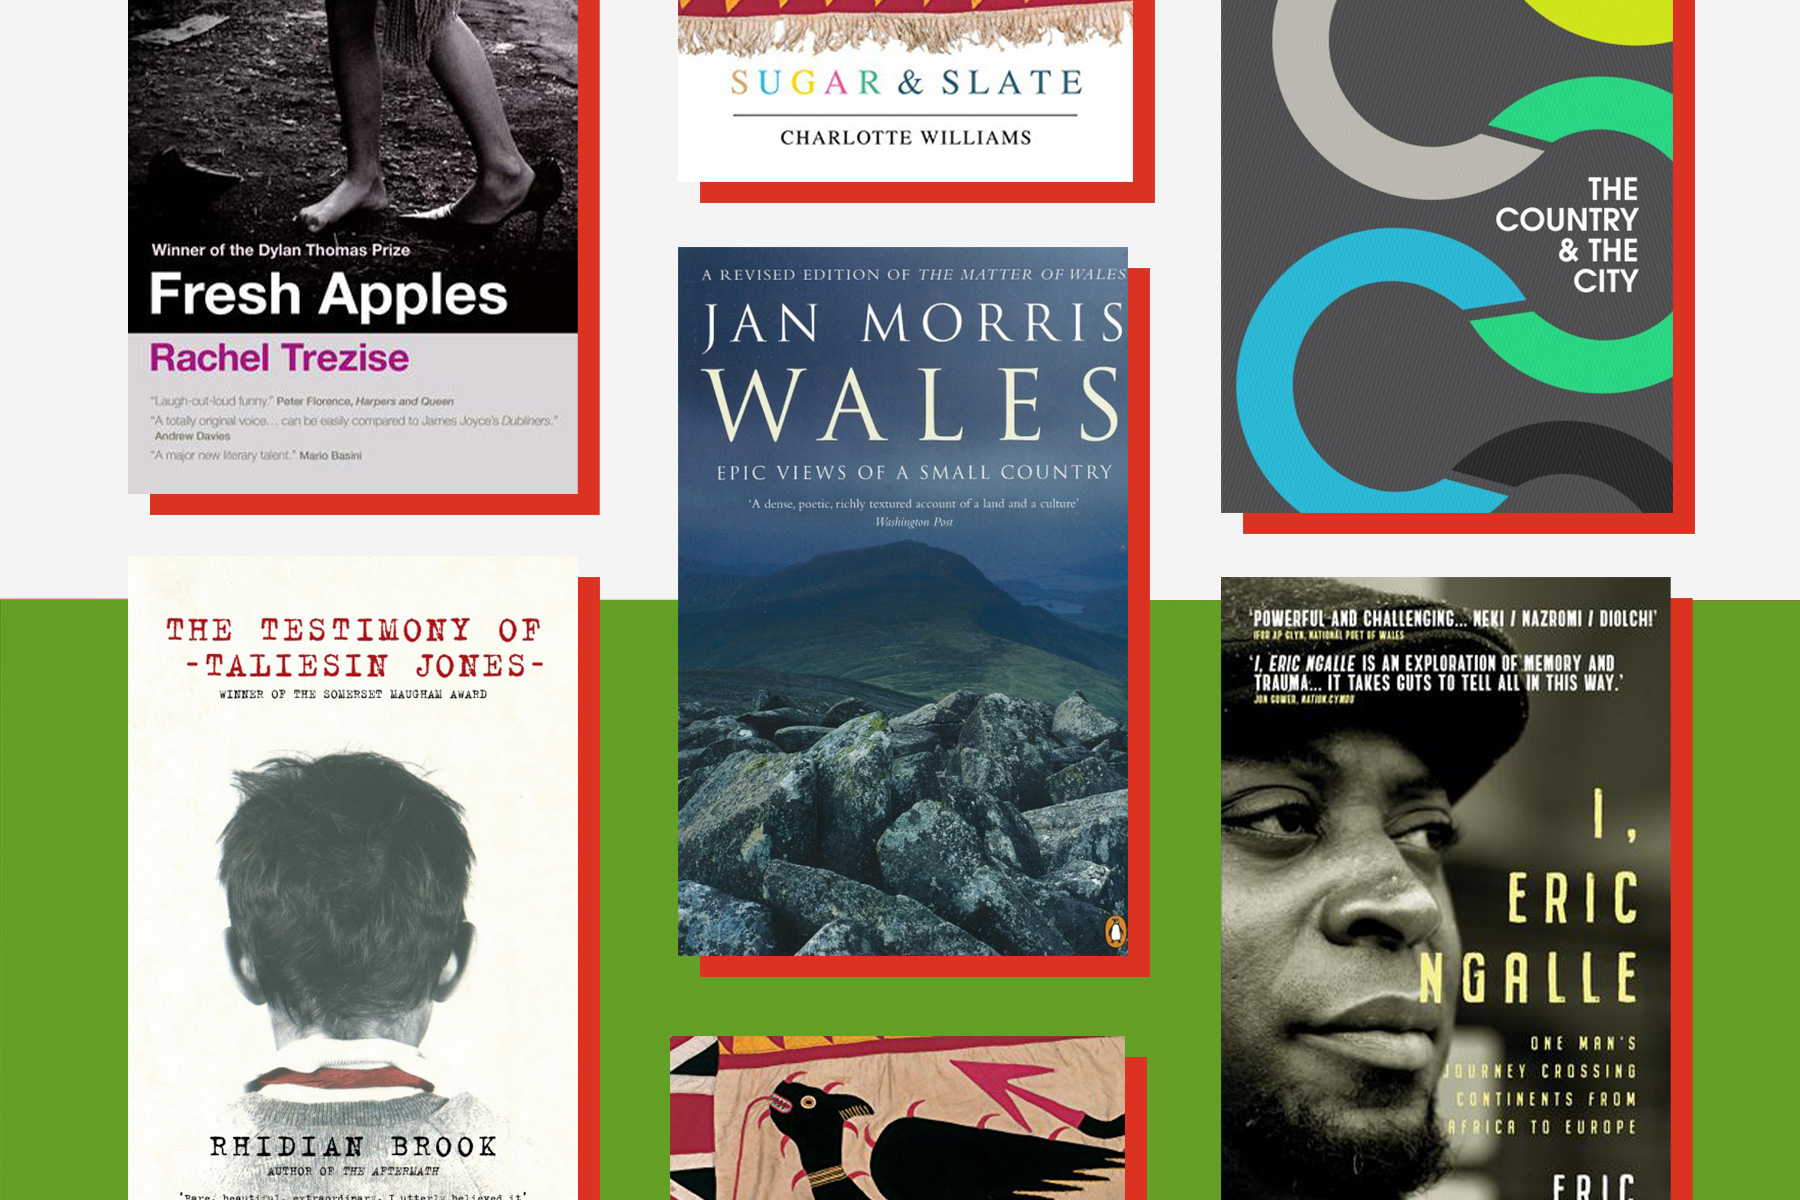 Covers of Welsh books against a green and white background.